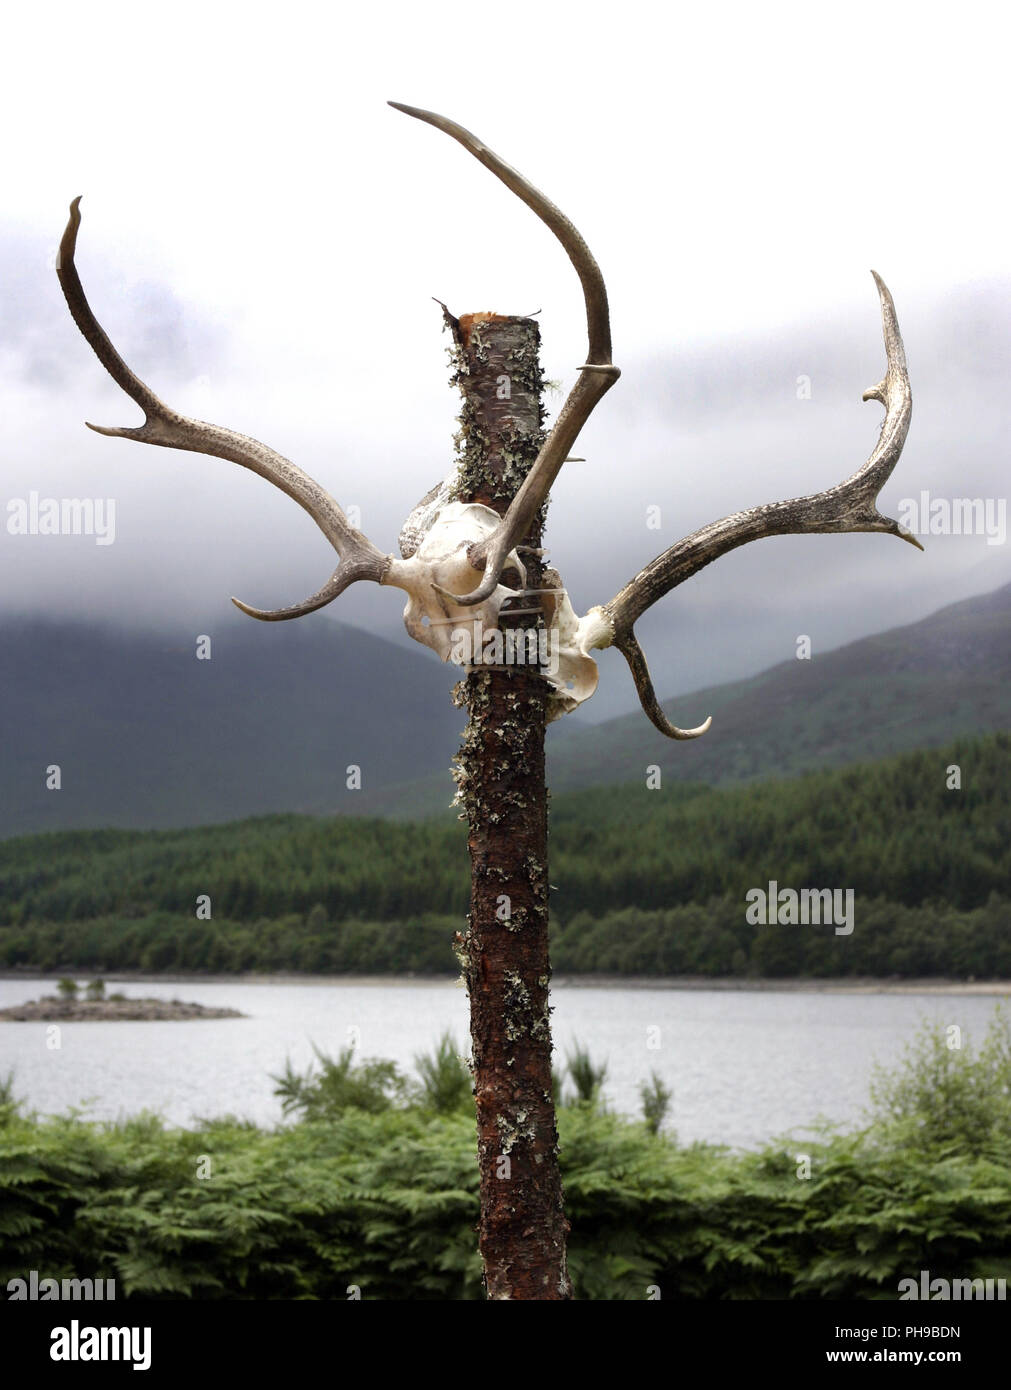 Two deer head skeletons with huge antlers, tied to a tree stump in a ritualistic manner, against the backdrop of mist, clouds, mountains, hills and a loch in Scotland. Stock Photo